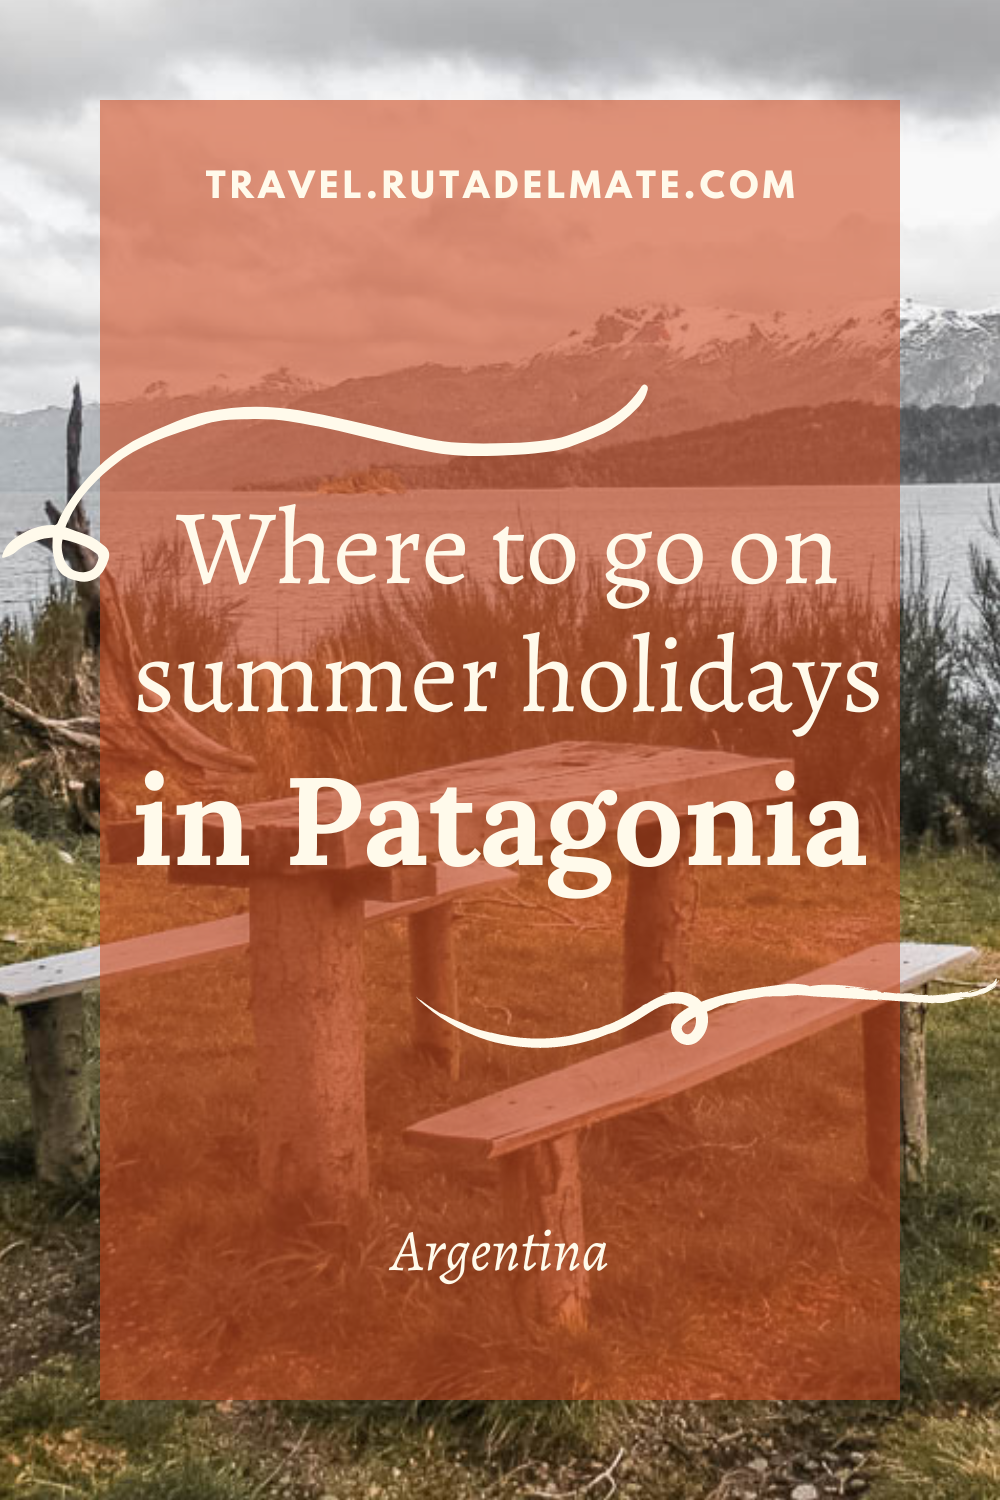 Where to go on holidays in Patagonia Argentina